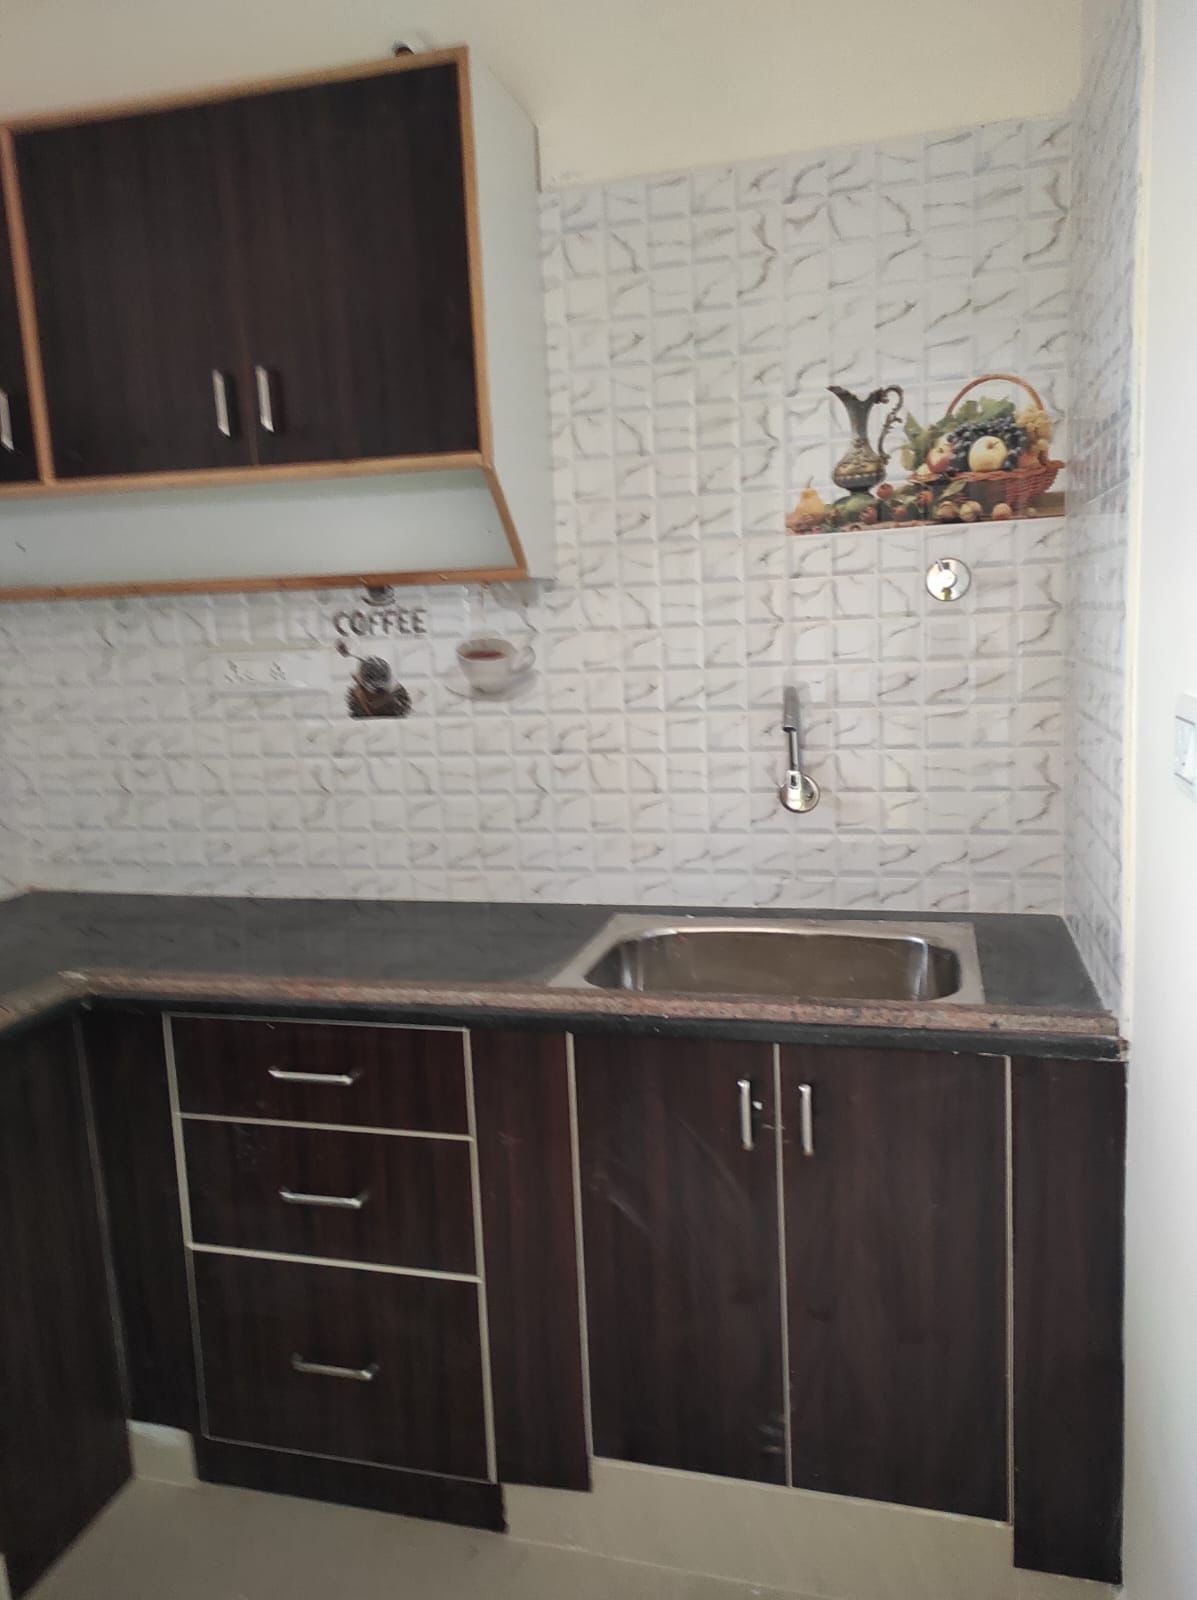 2 BHK Independent House for Lease Only at JAML2 - 4617-18lakh in Vignana Nagar